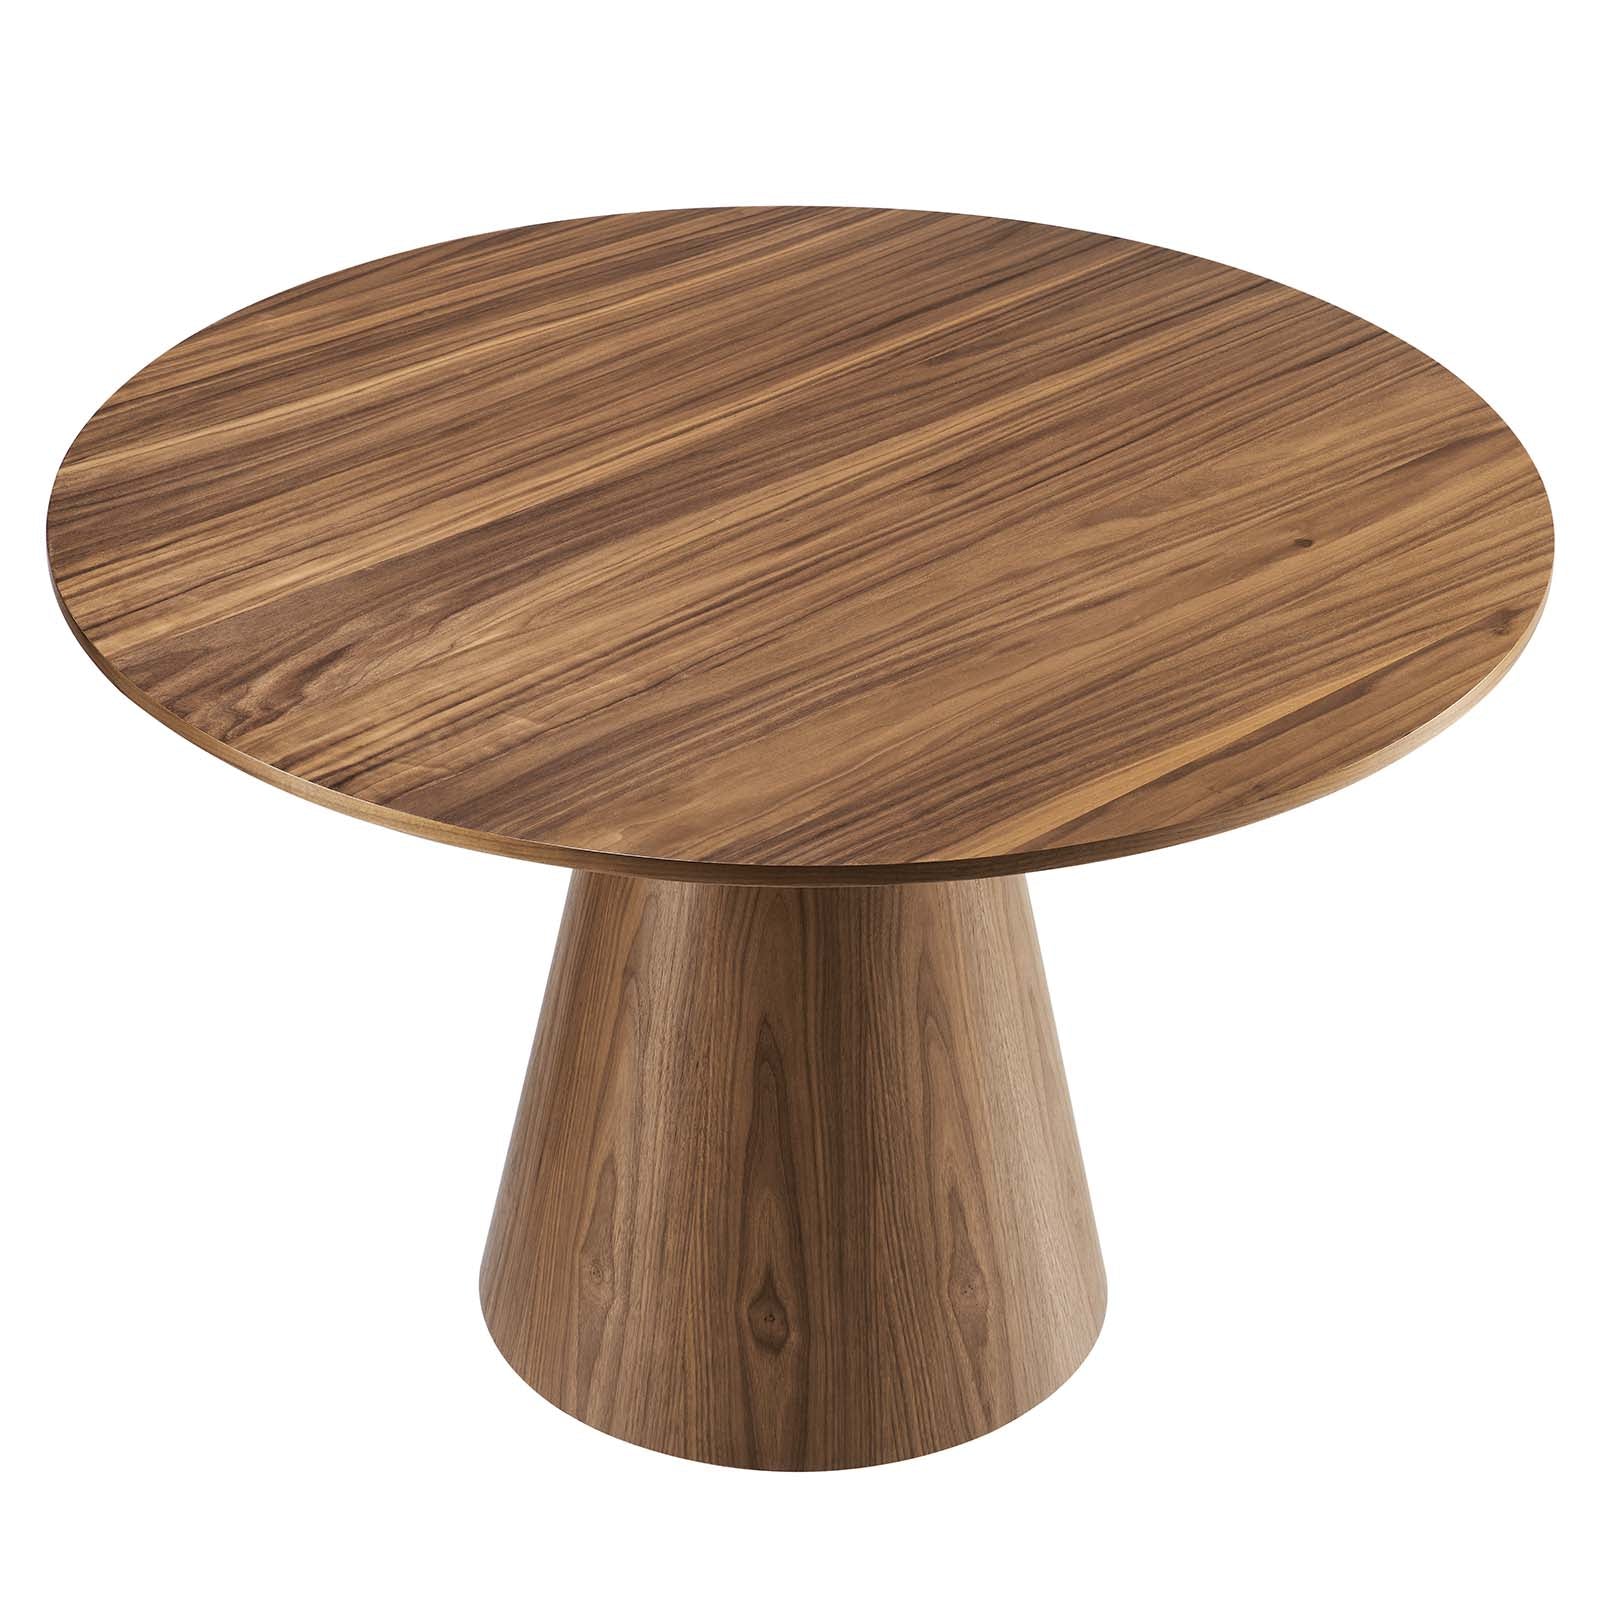 Provision 47" Round Dining Table - East Shore Modern Home Furnishings